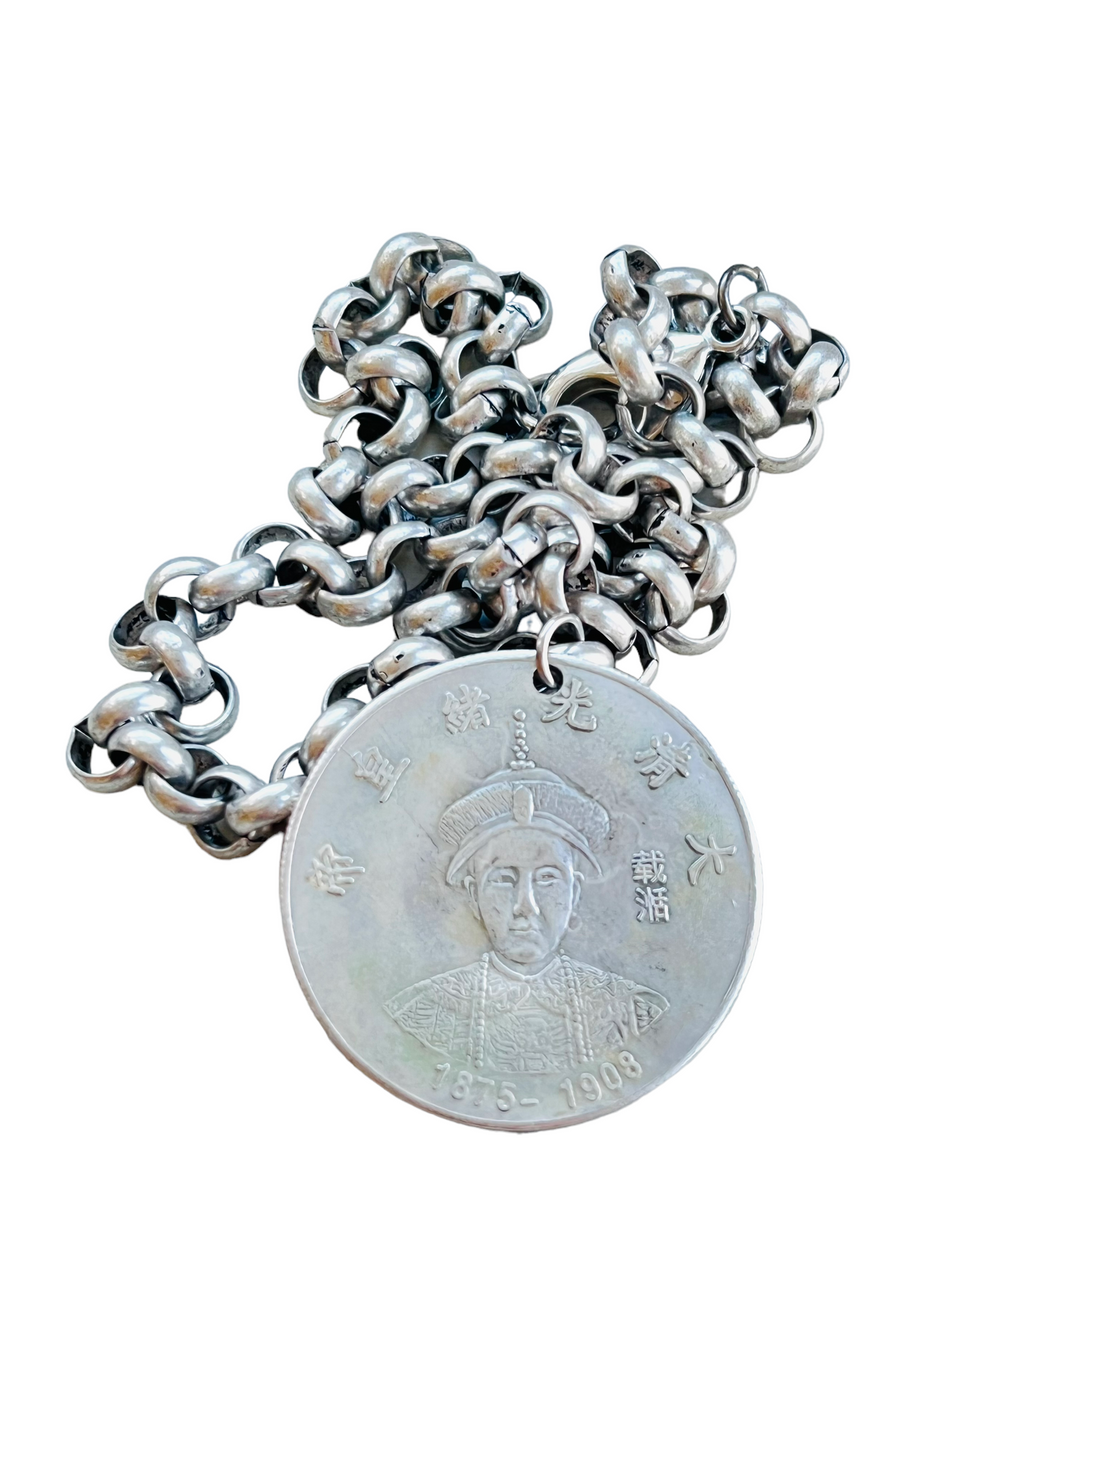 Vintage Qing Dynasty coin necklace by hipV Modern Vintage Jewelry.